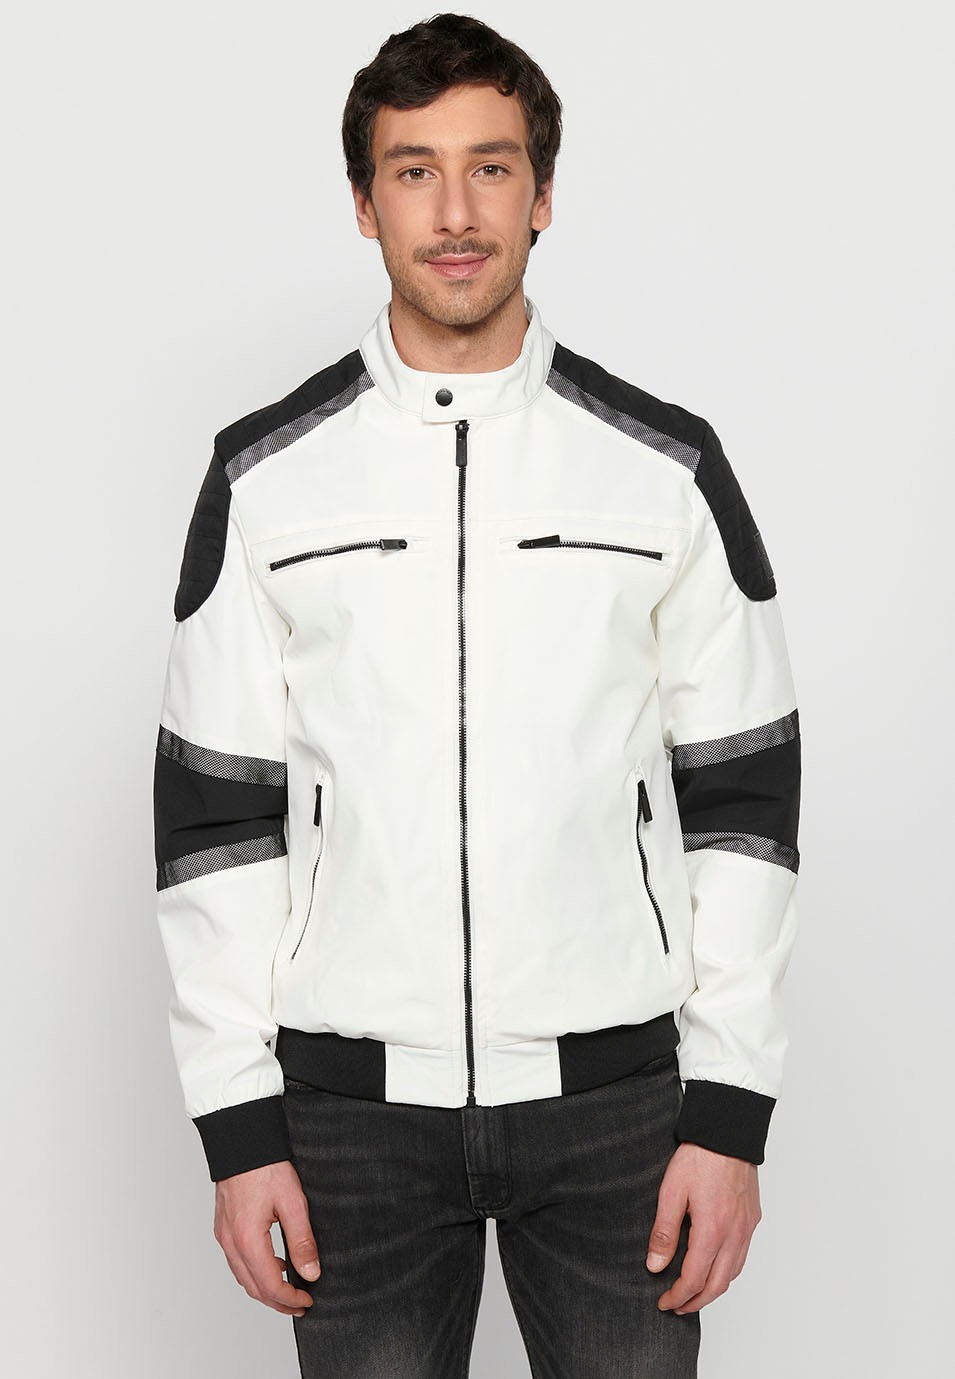 White Long Sleeve Jacket with High Round Neck, Pockets and Front Zipper Closure for Men 2